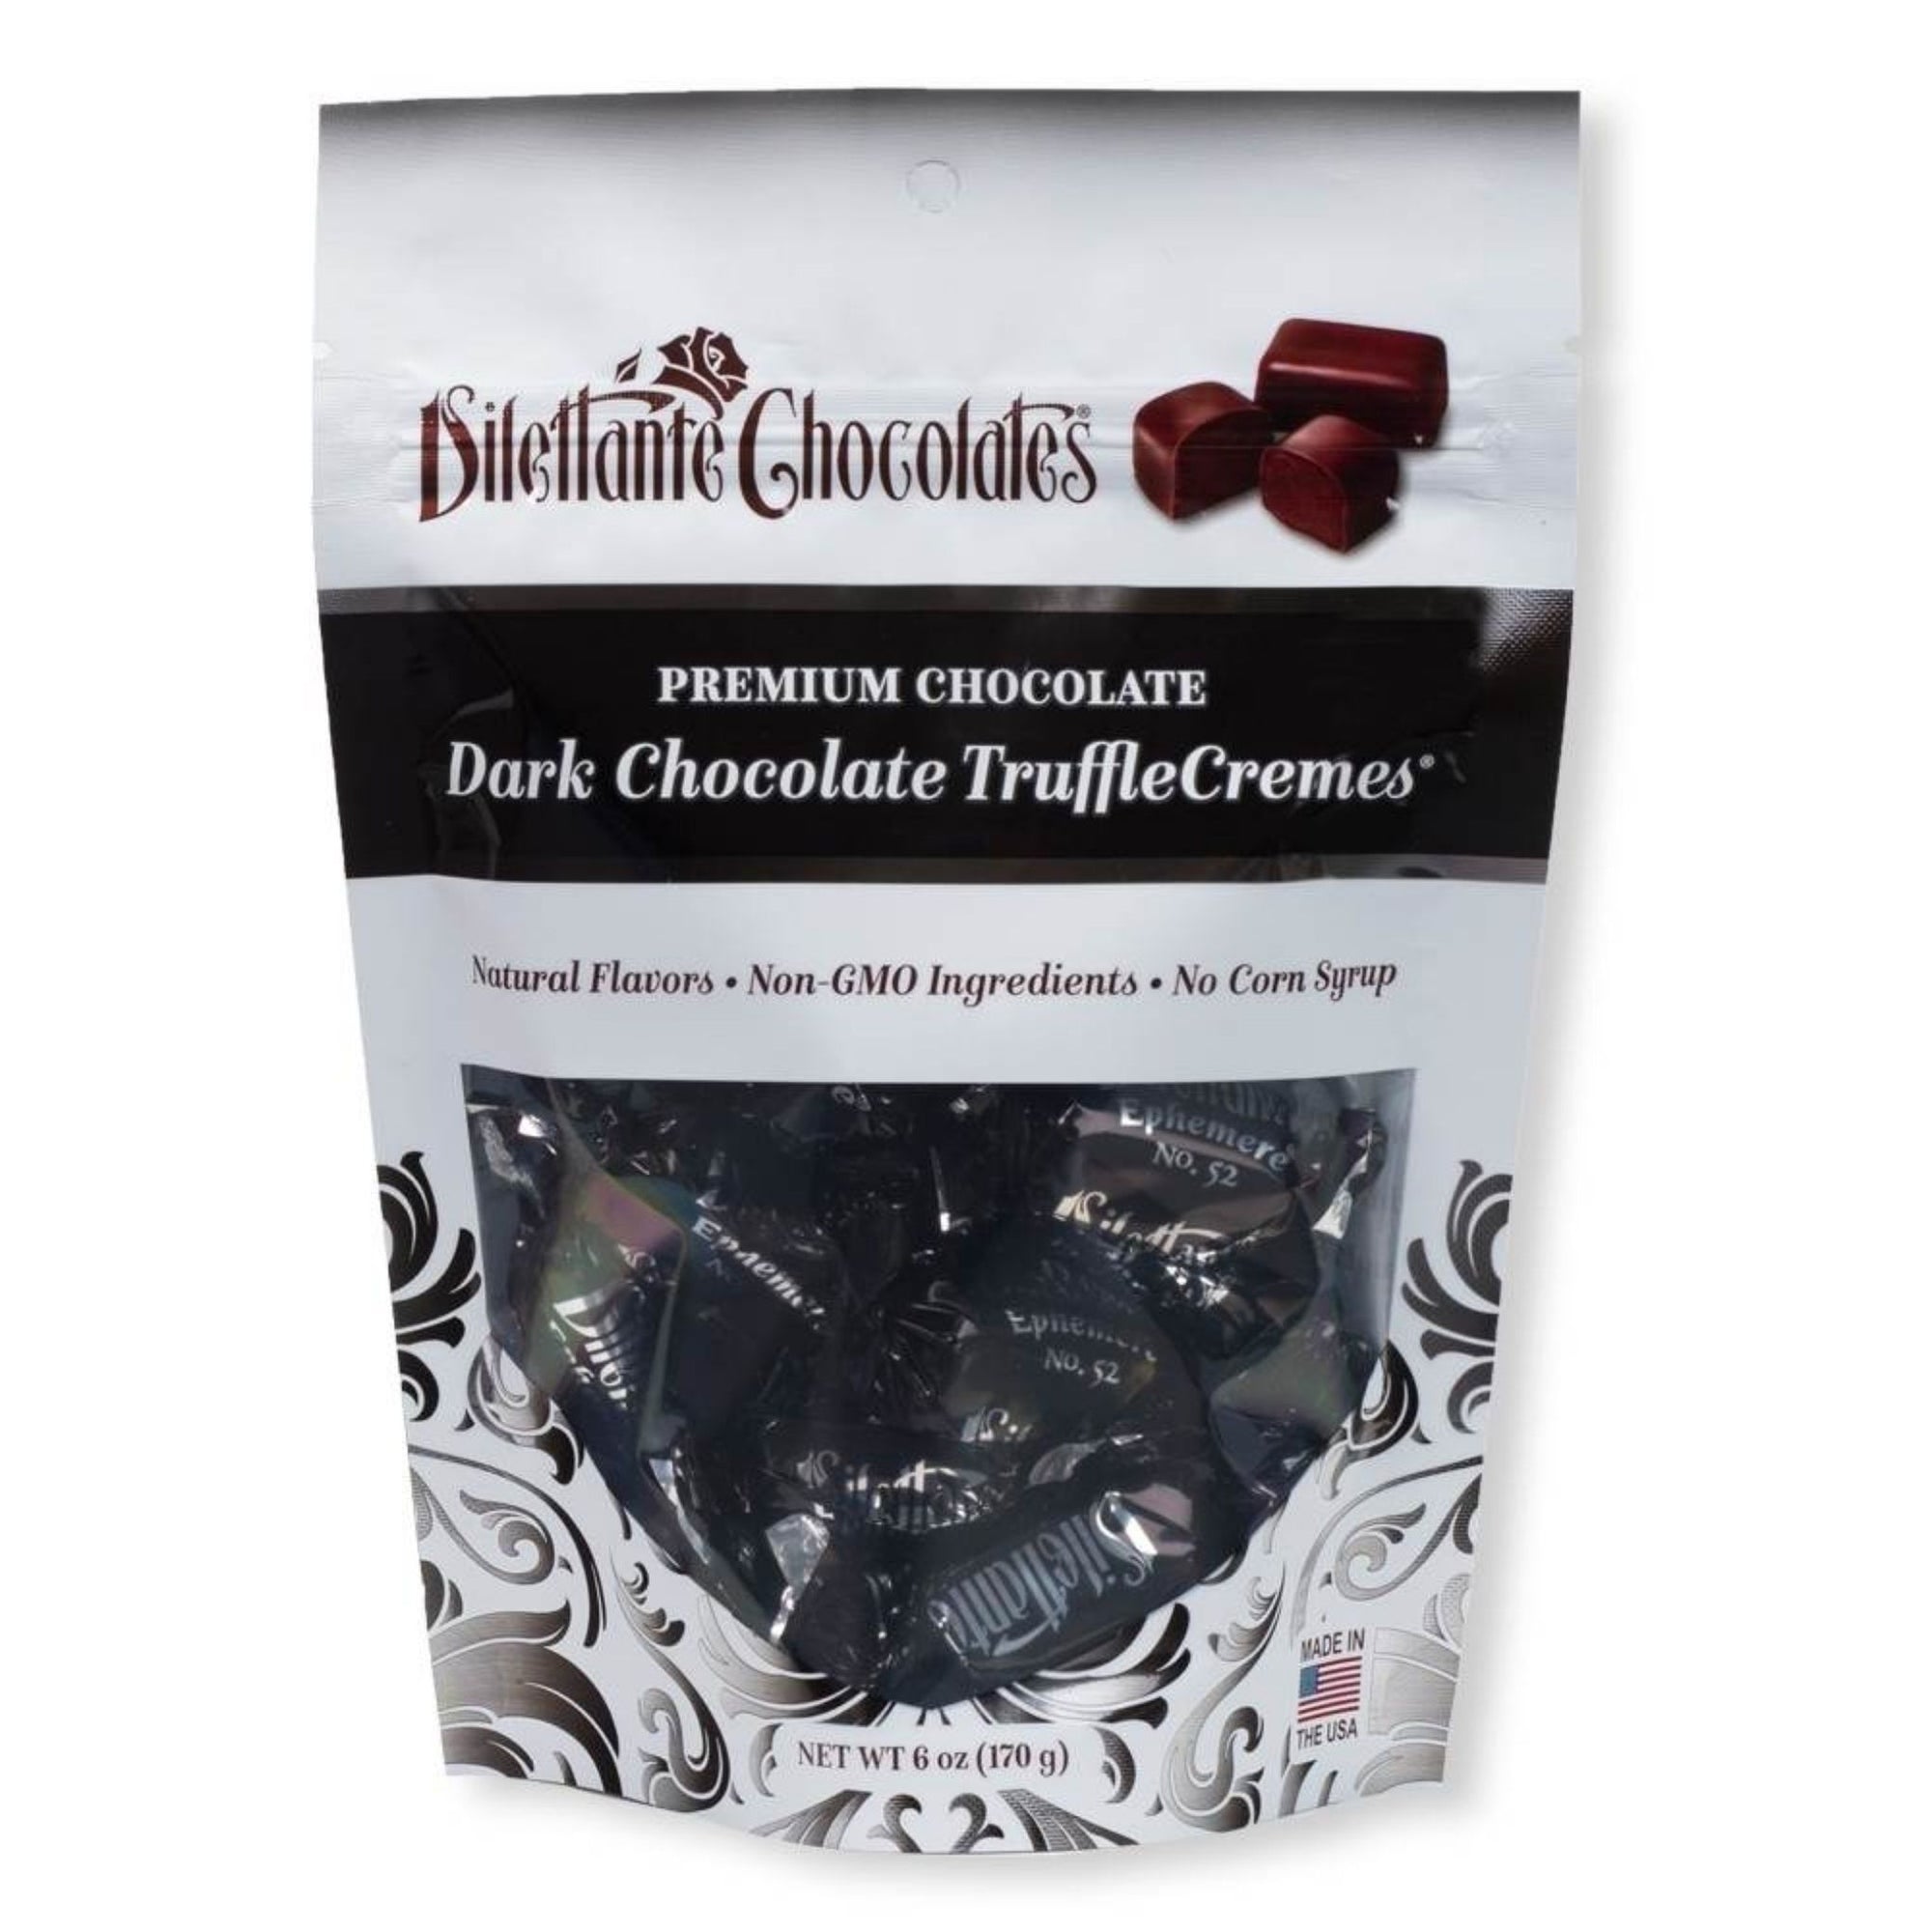 Dilettante Chocolates Premium Chocolate Dark Chocolate TruffleCremes with natural Flavors, Non-GMO Ingredients, and No Corn Syrup